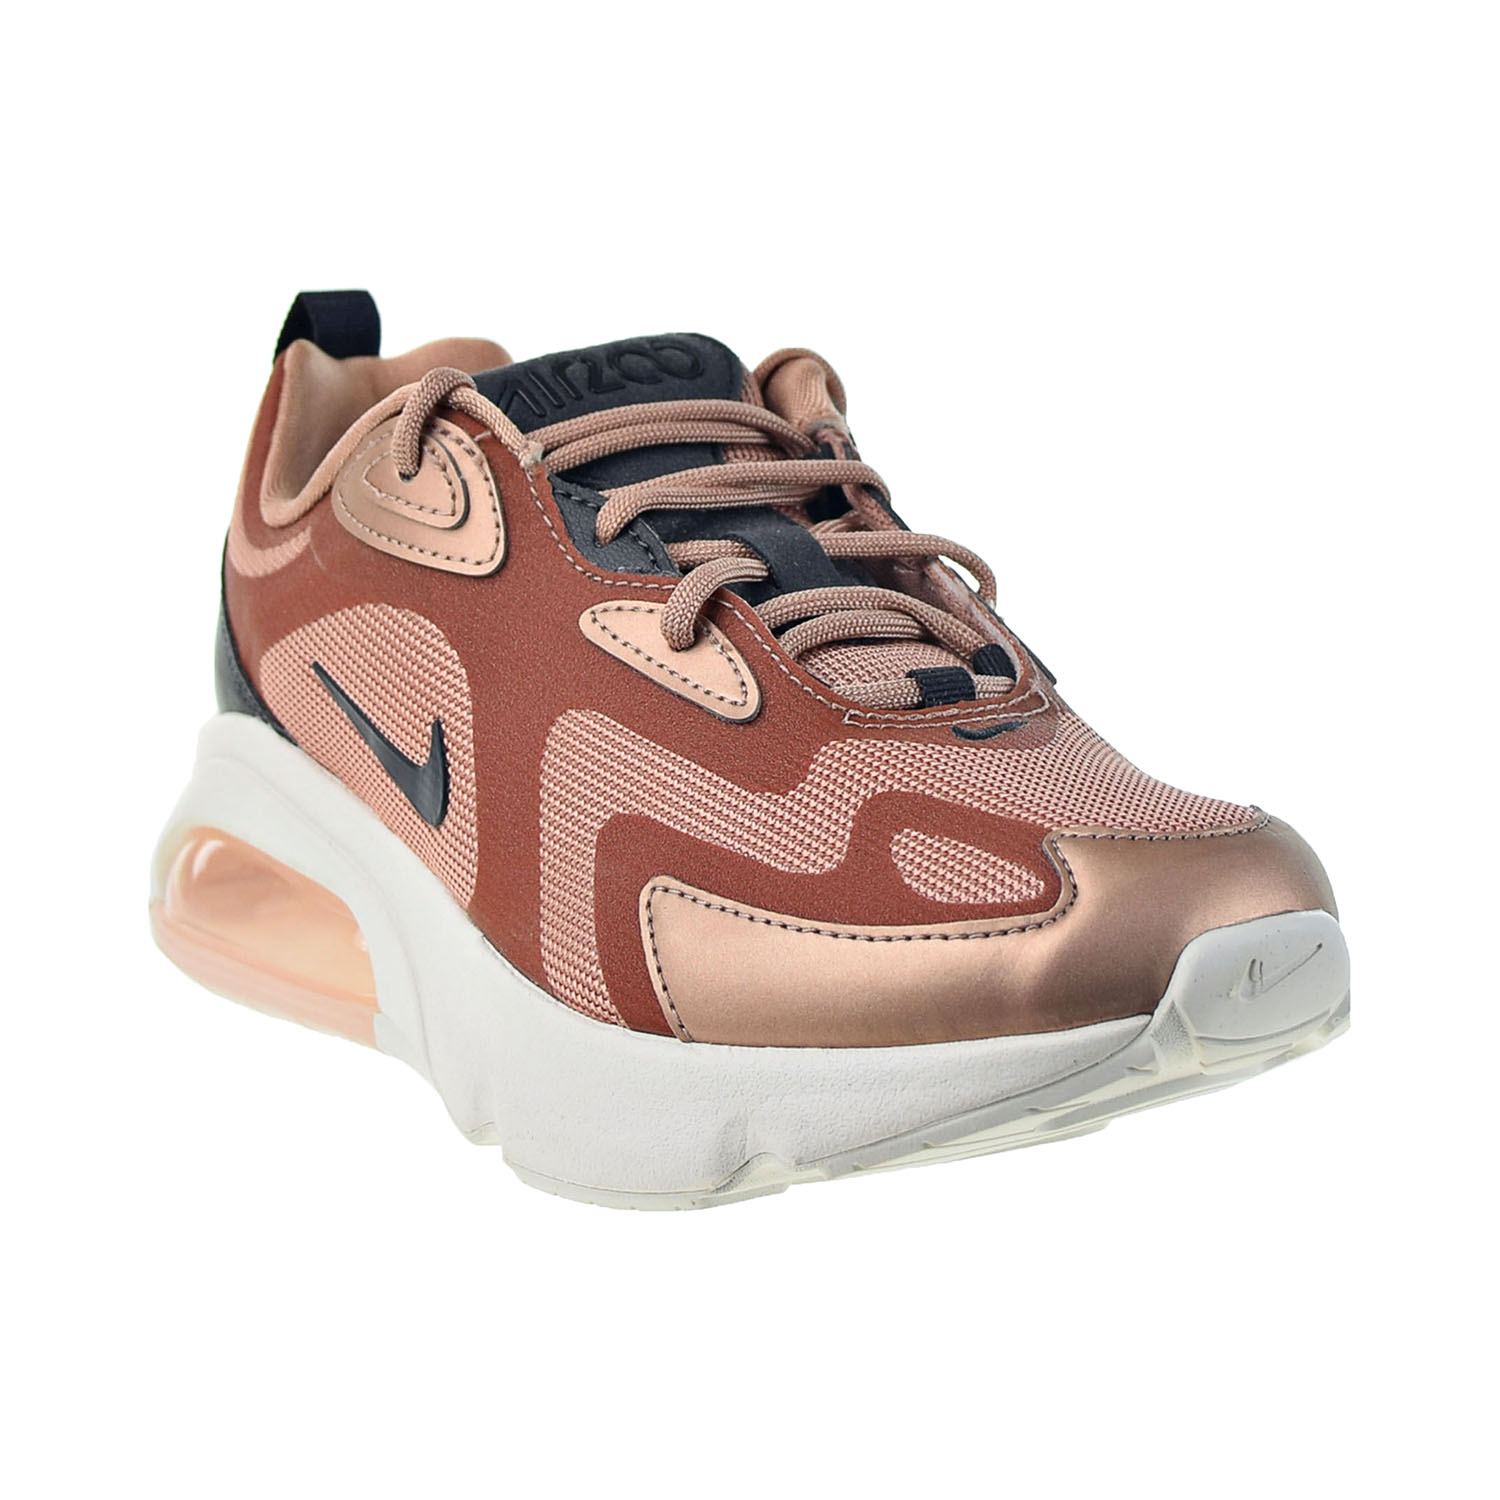 Nike Air Max 200 "Holiday Sparkle" Women's Shoes Metallic Red-Bronze ct1185-900 - image 2 of 6